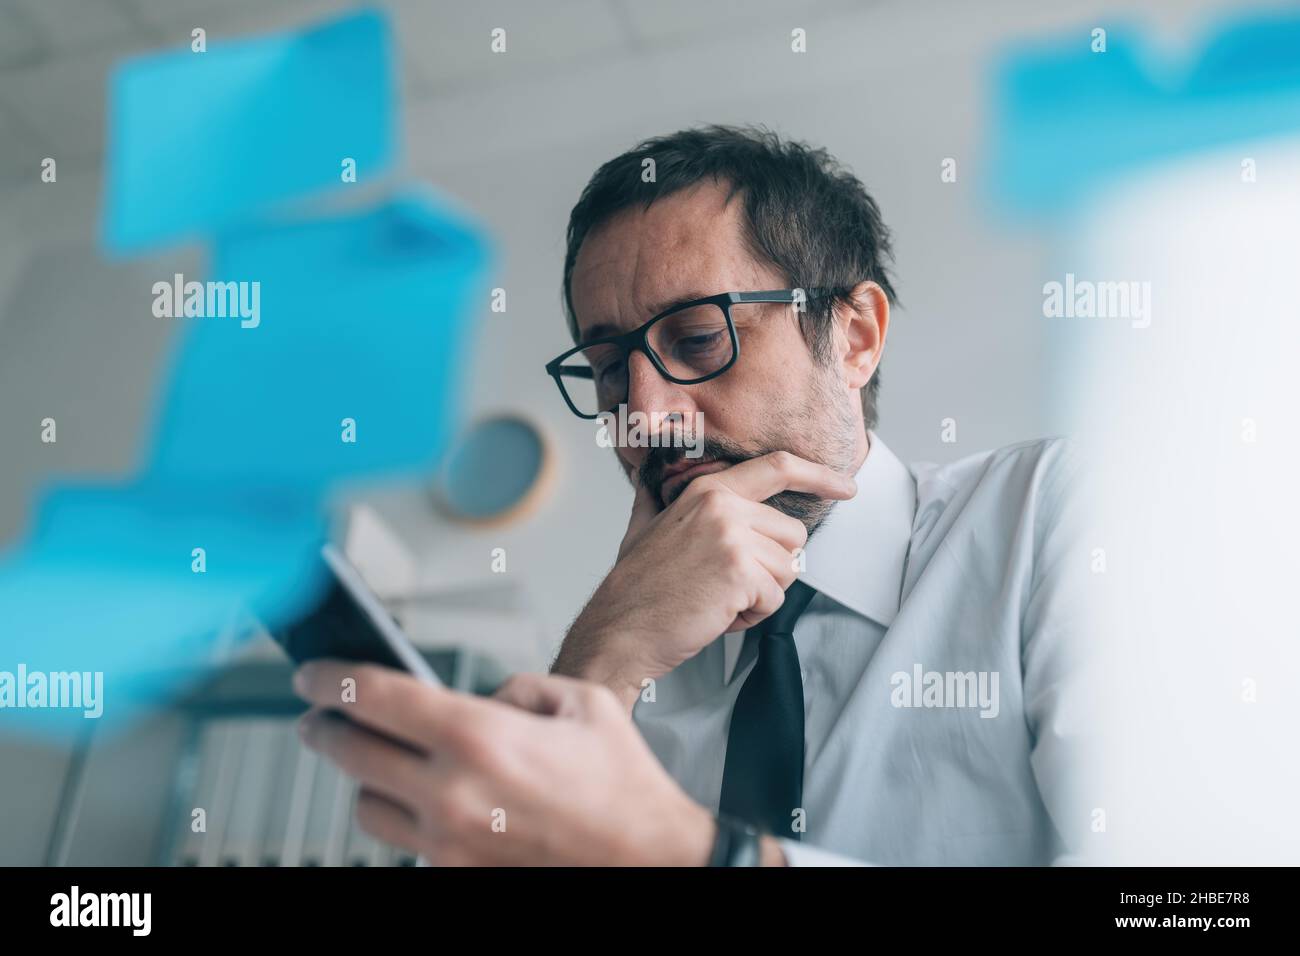 Considerate businessman thinking of text message reply and looking at mobile phone in office, selective focus Stock Photo